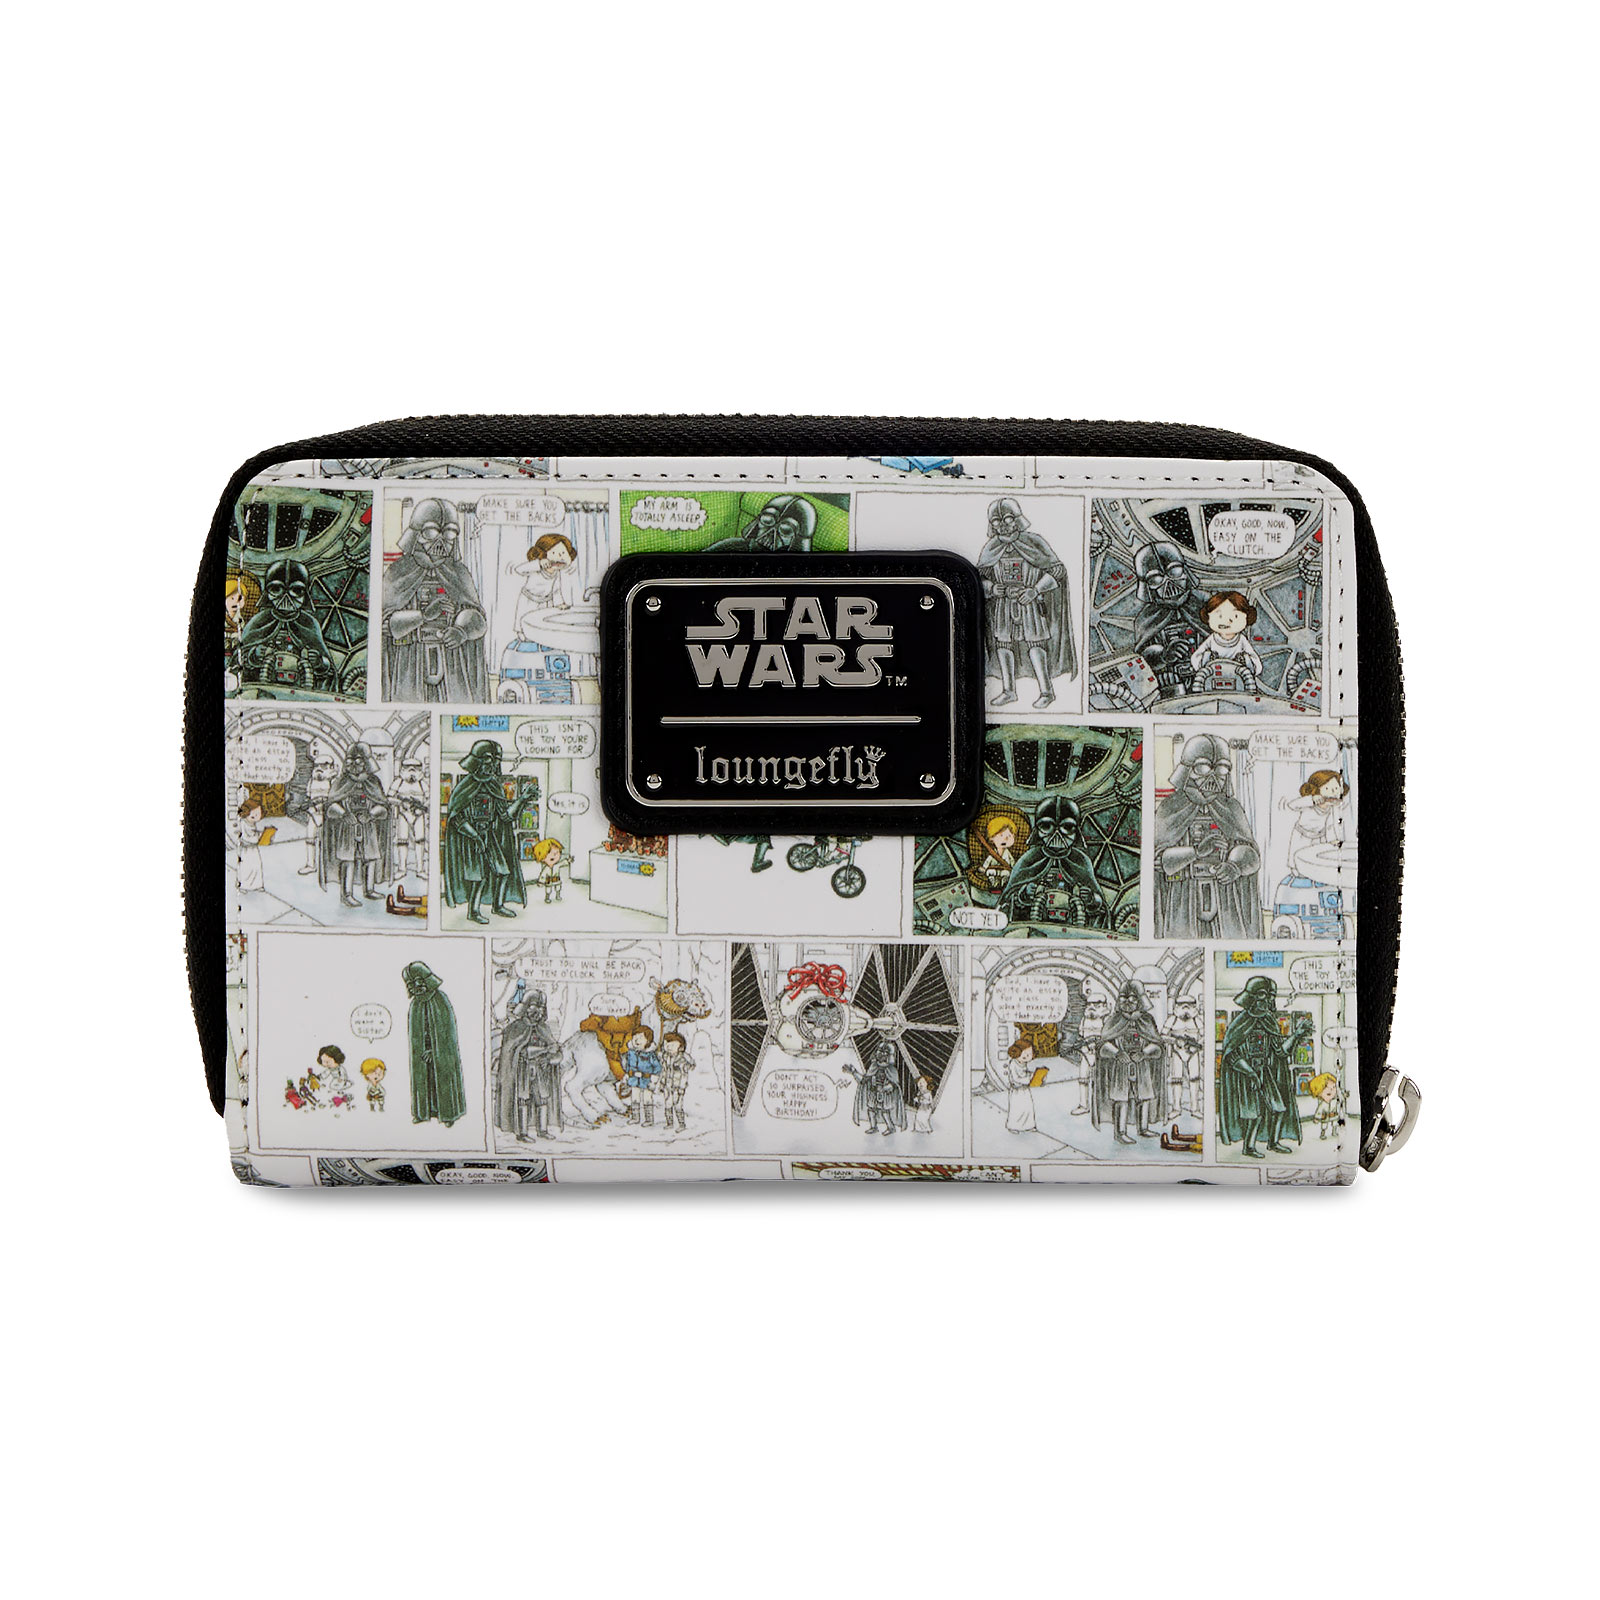 Darth Vader I'm Your Father Comic Strip Wallet - Star Wars